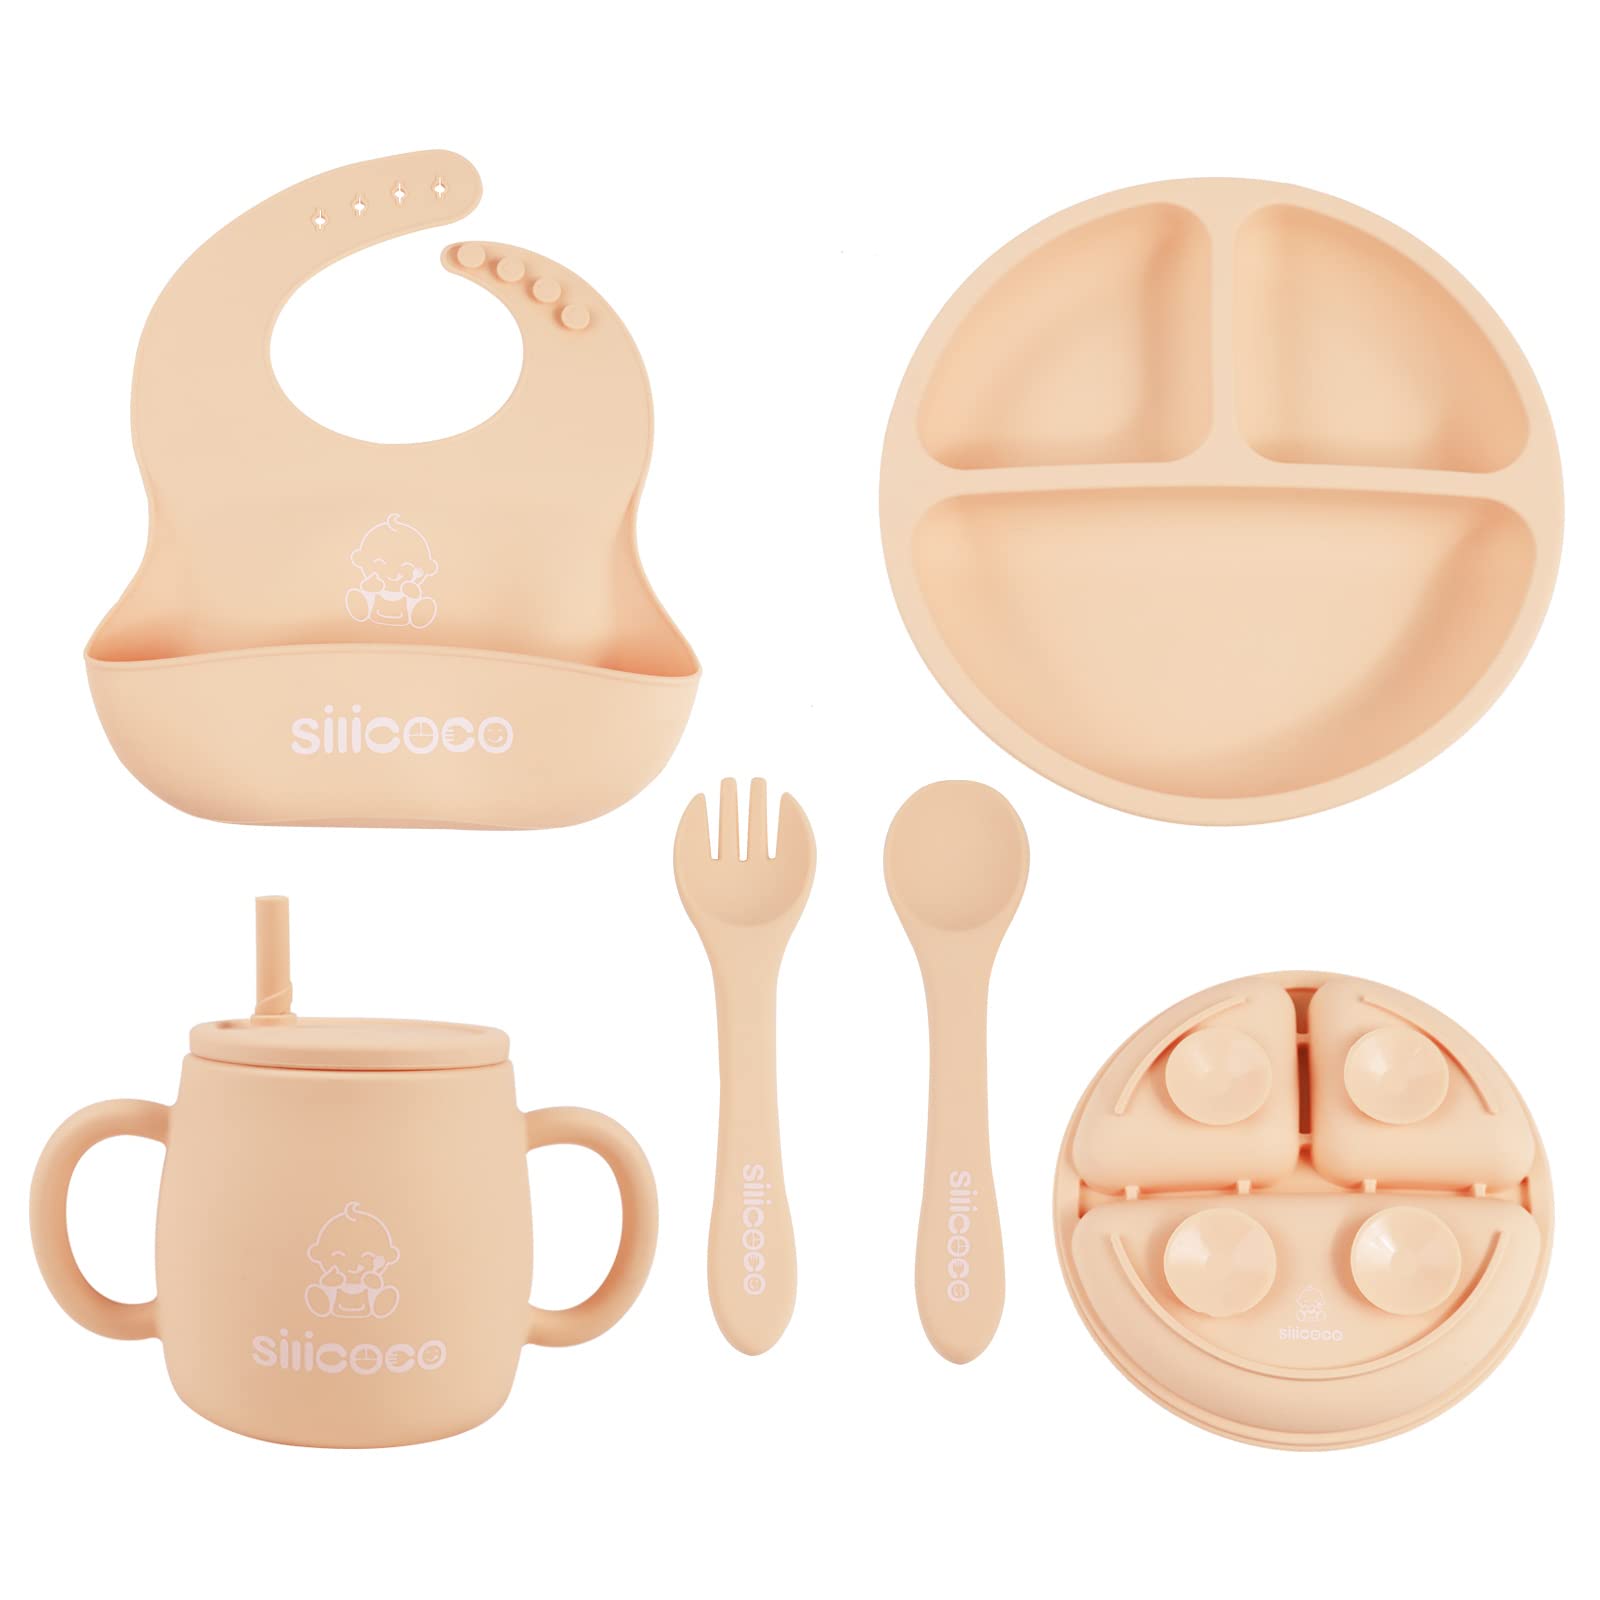 10 X BABY FEEDING SET, SILICONE BABY LED WEANING SUPPLIES SET WITH SUCTION PLATE, BIB, SIPPY CUP, BABY SPOON AND FORK, TODDLER FEEDING EATING UTENSILS SETS (BEIGE) - TOTAL RRP £83: LOCATION - RACK B